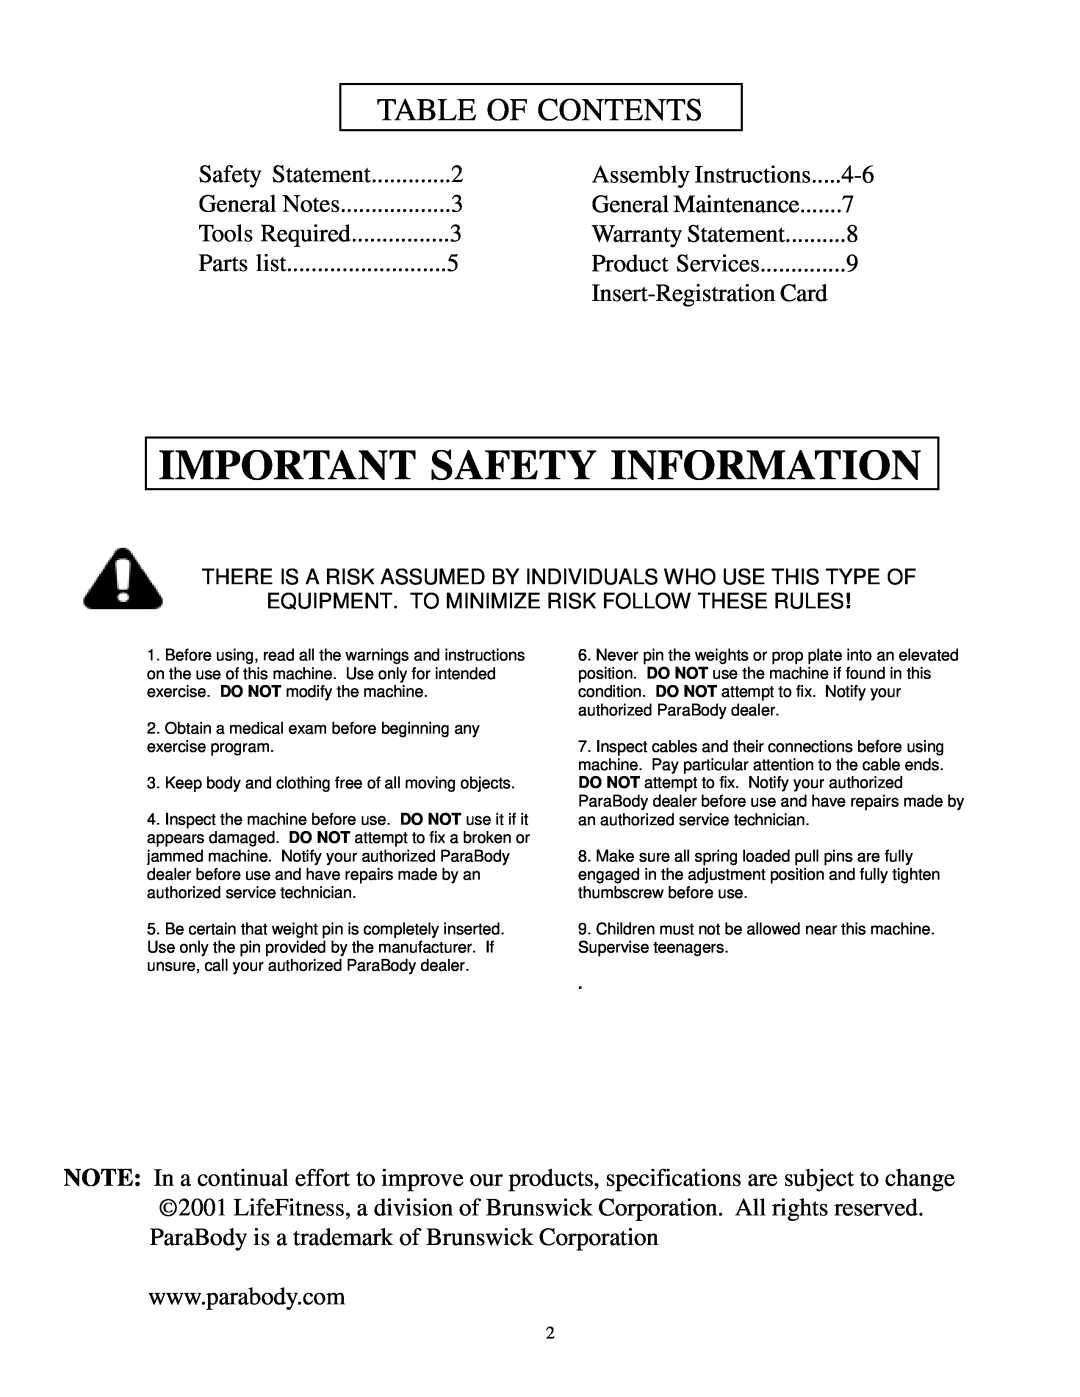 ParaBody 822 Important Safety Information, Table Of Contents, Assembly Instructions, General Maintenance, Product Services 